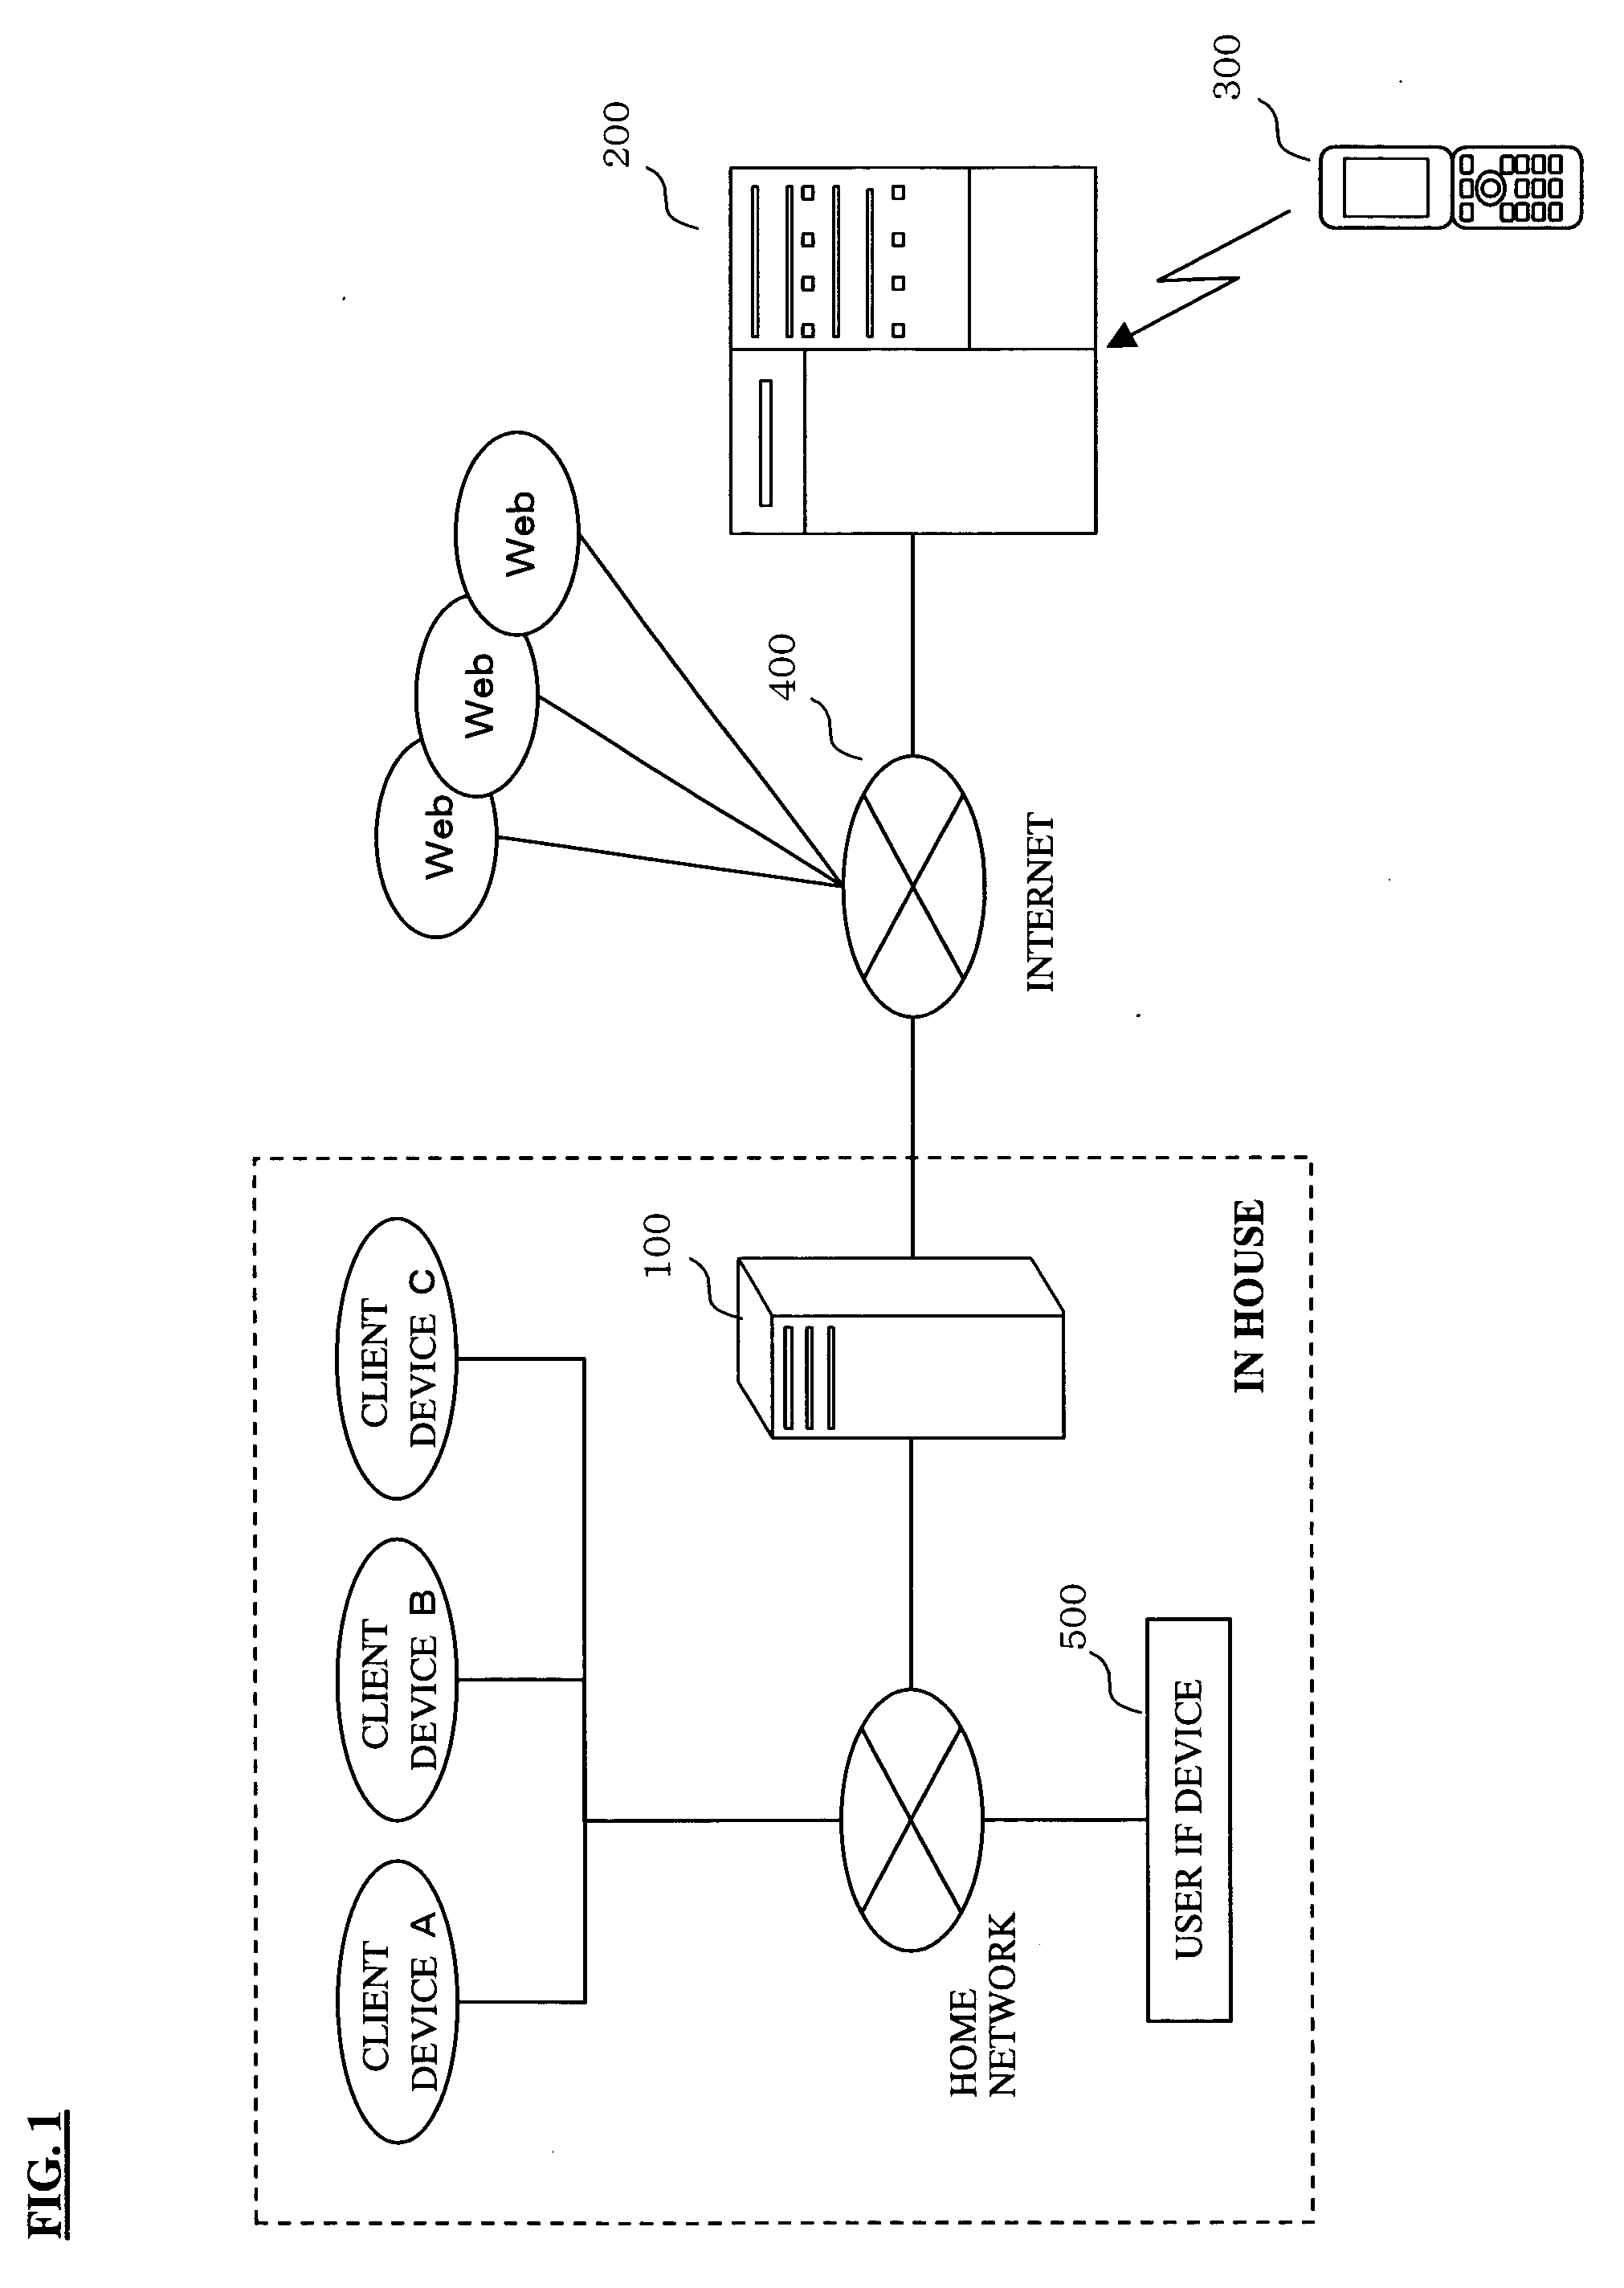 Network system, appliance controlling household server, and intermediary server